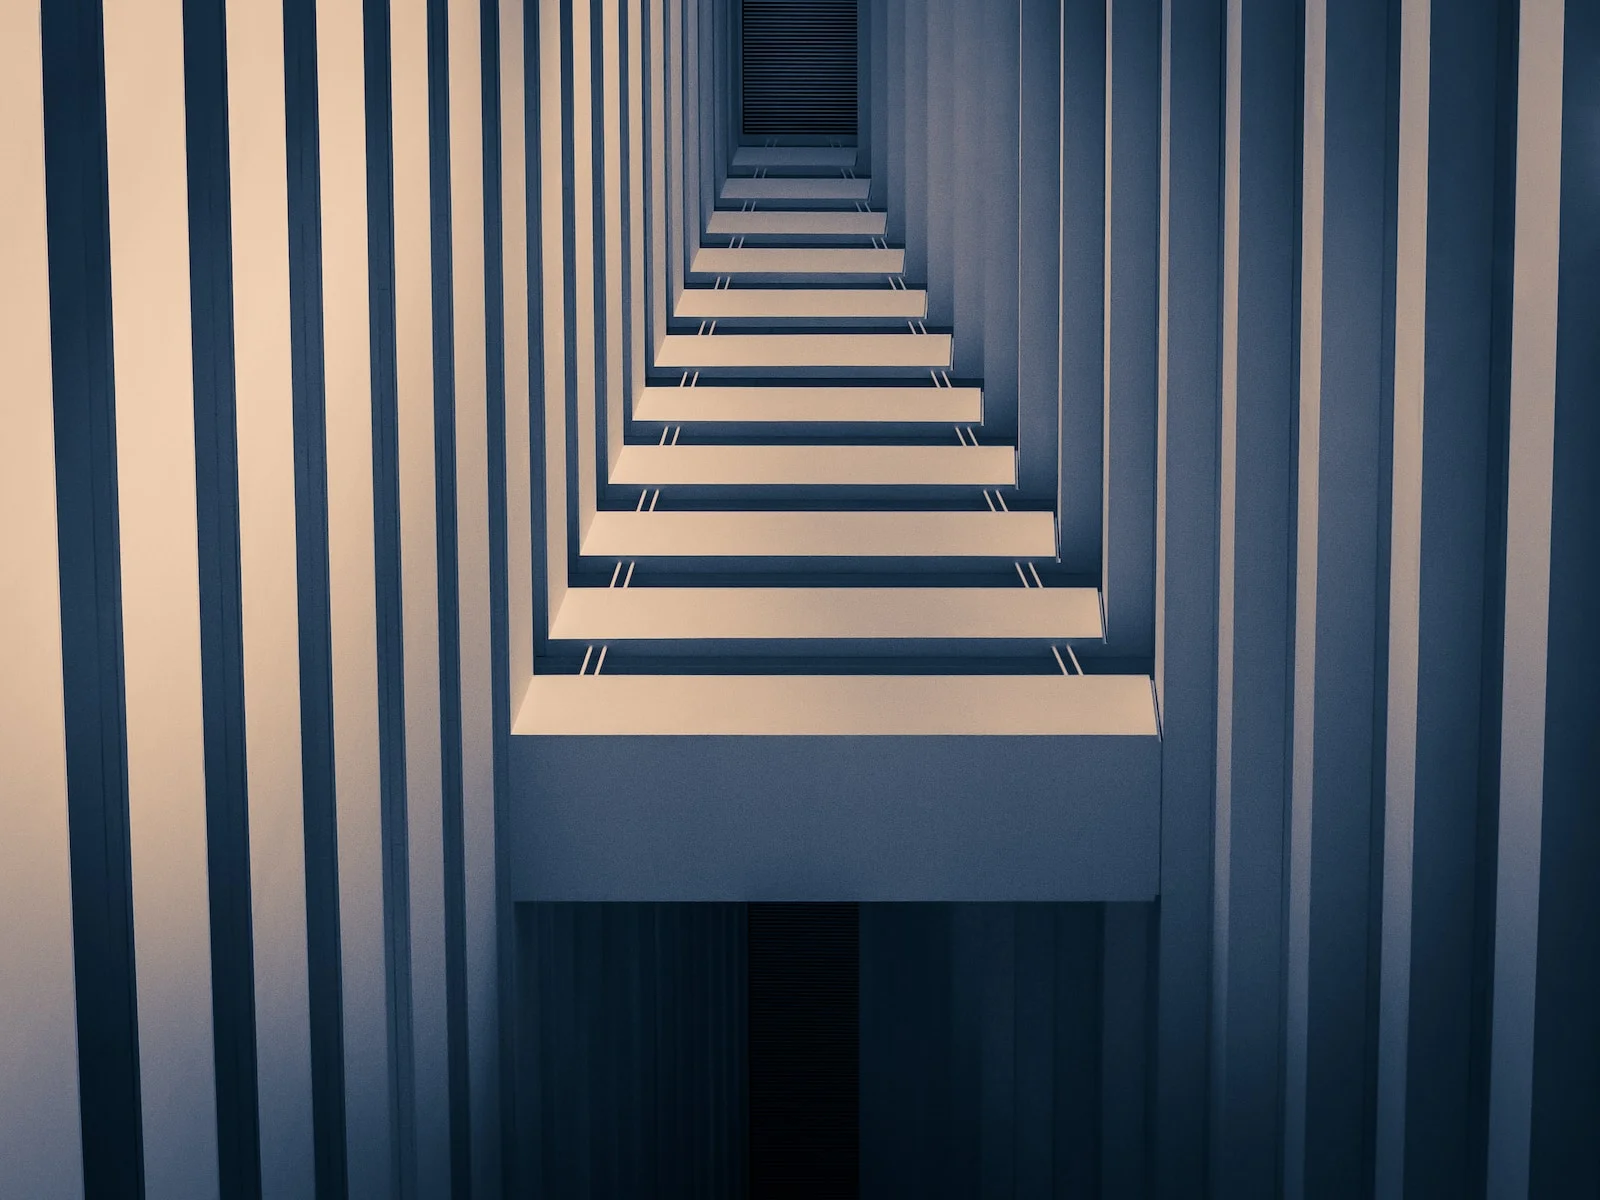 a row of stairs in a room with white walls